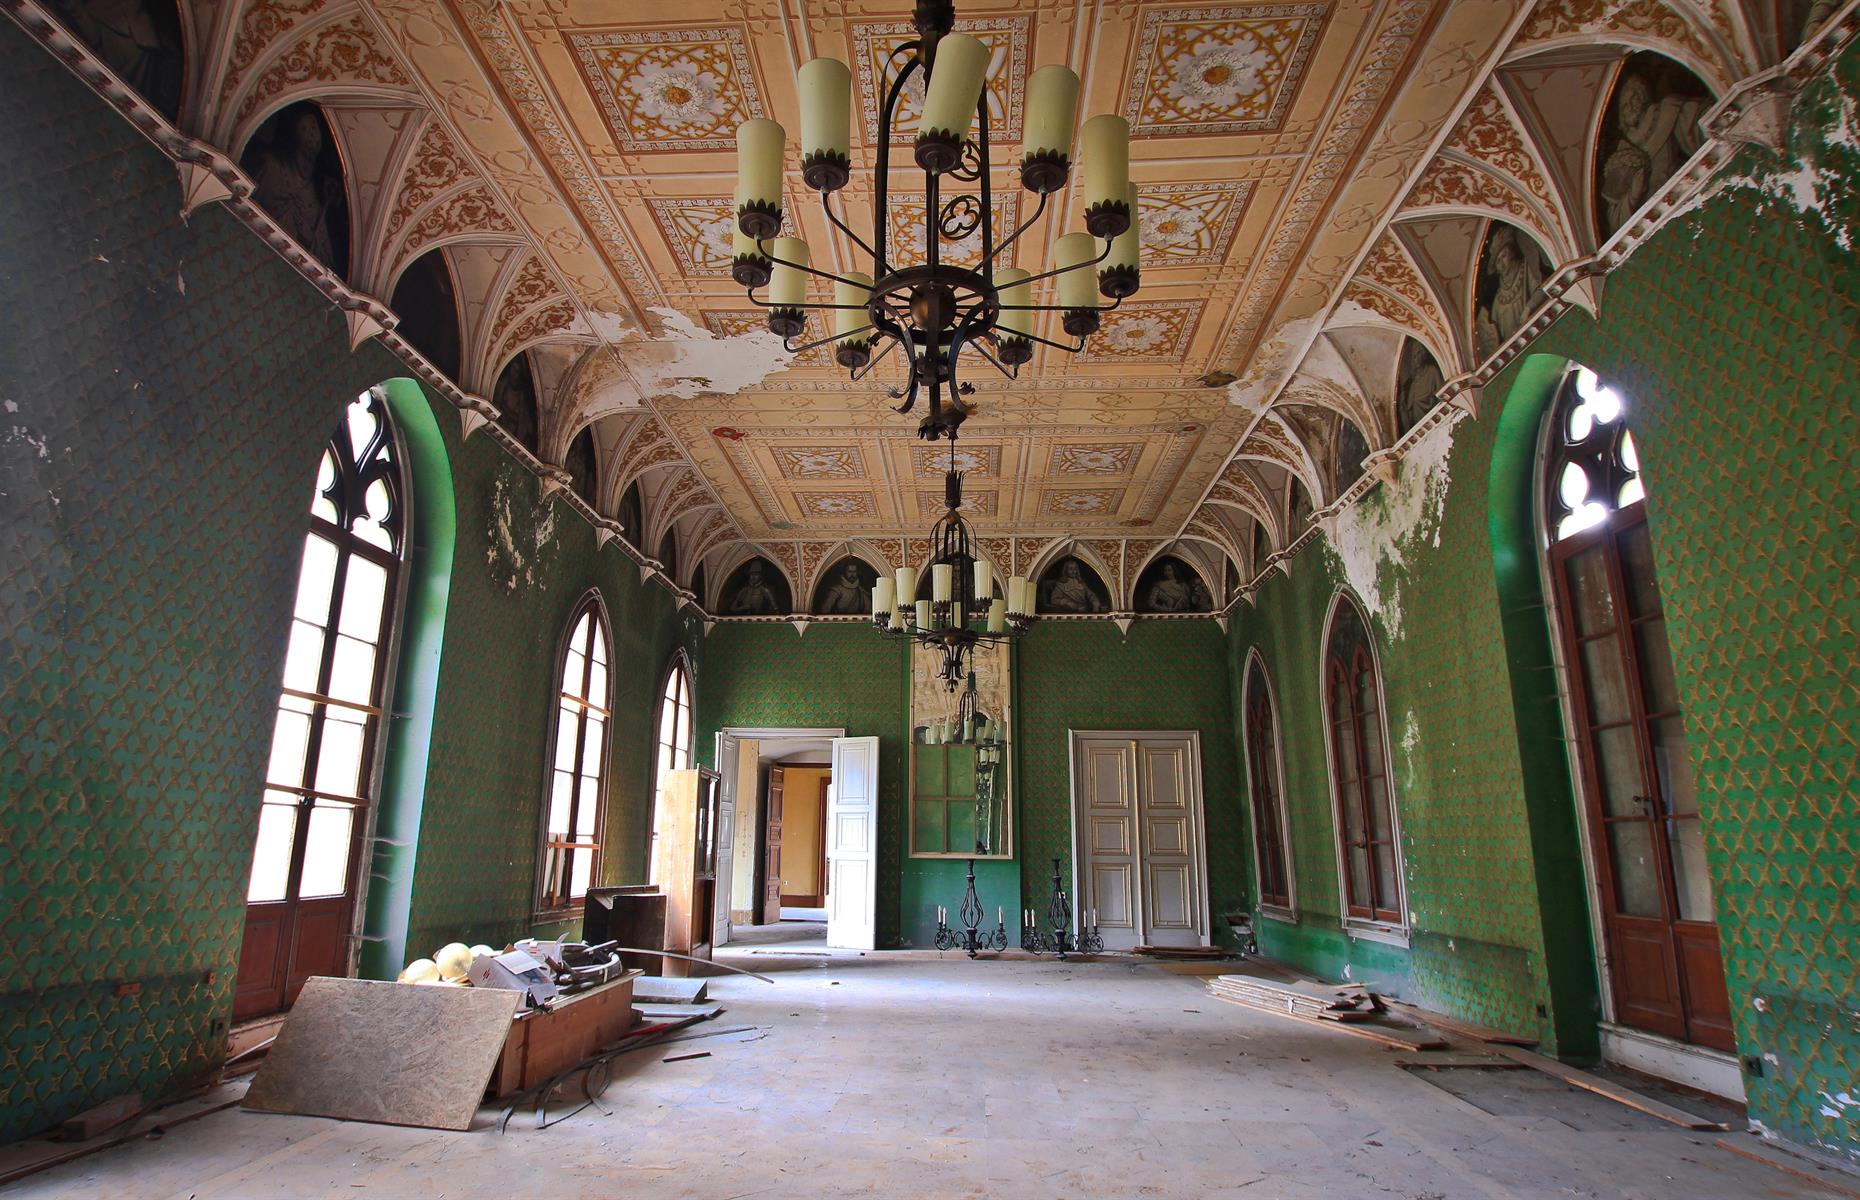 <p>In 2008 it was purchased by Russian investors but they also left the castle to rot even further over the years and eventually the state was forced to take action to save Reinhardsbrunn. This room would once have been a place of high society but with peeling wallpaper and debris littered over the floor, it's no longer in its prime, though the decorative carvings are still breathtaking.</p>